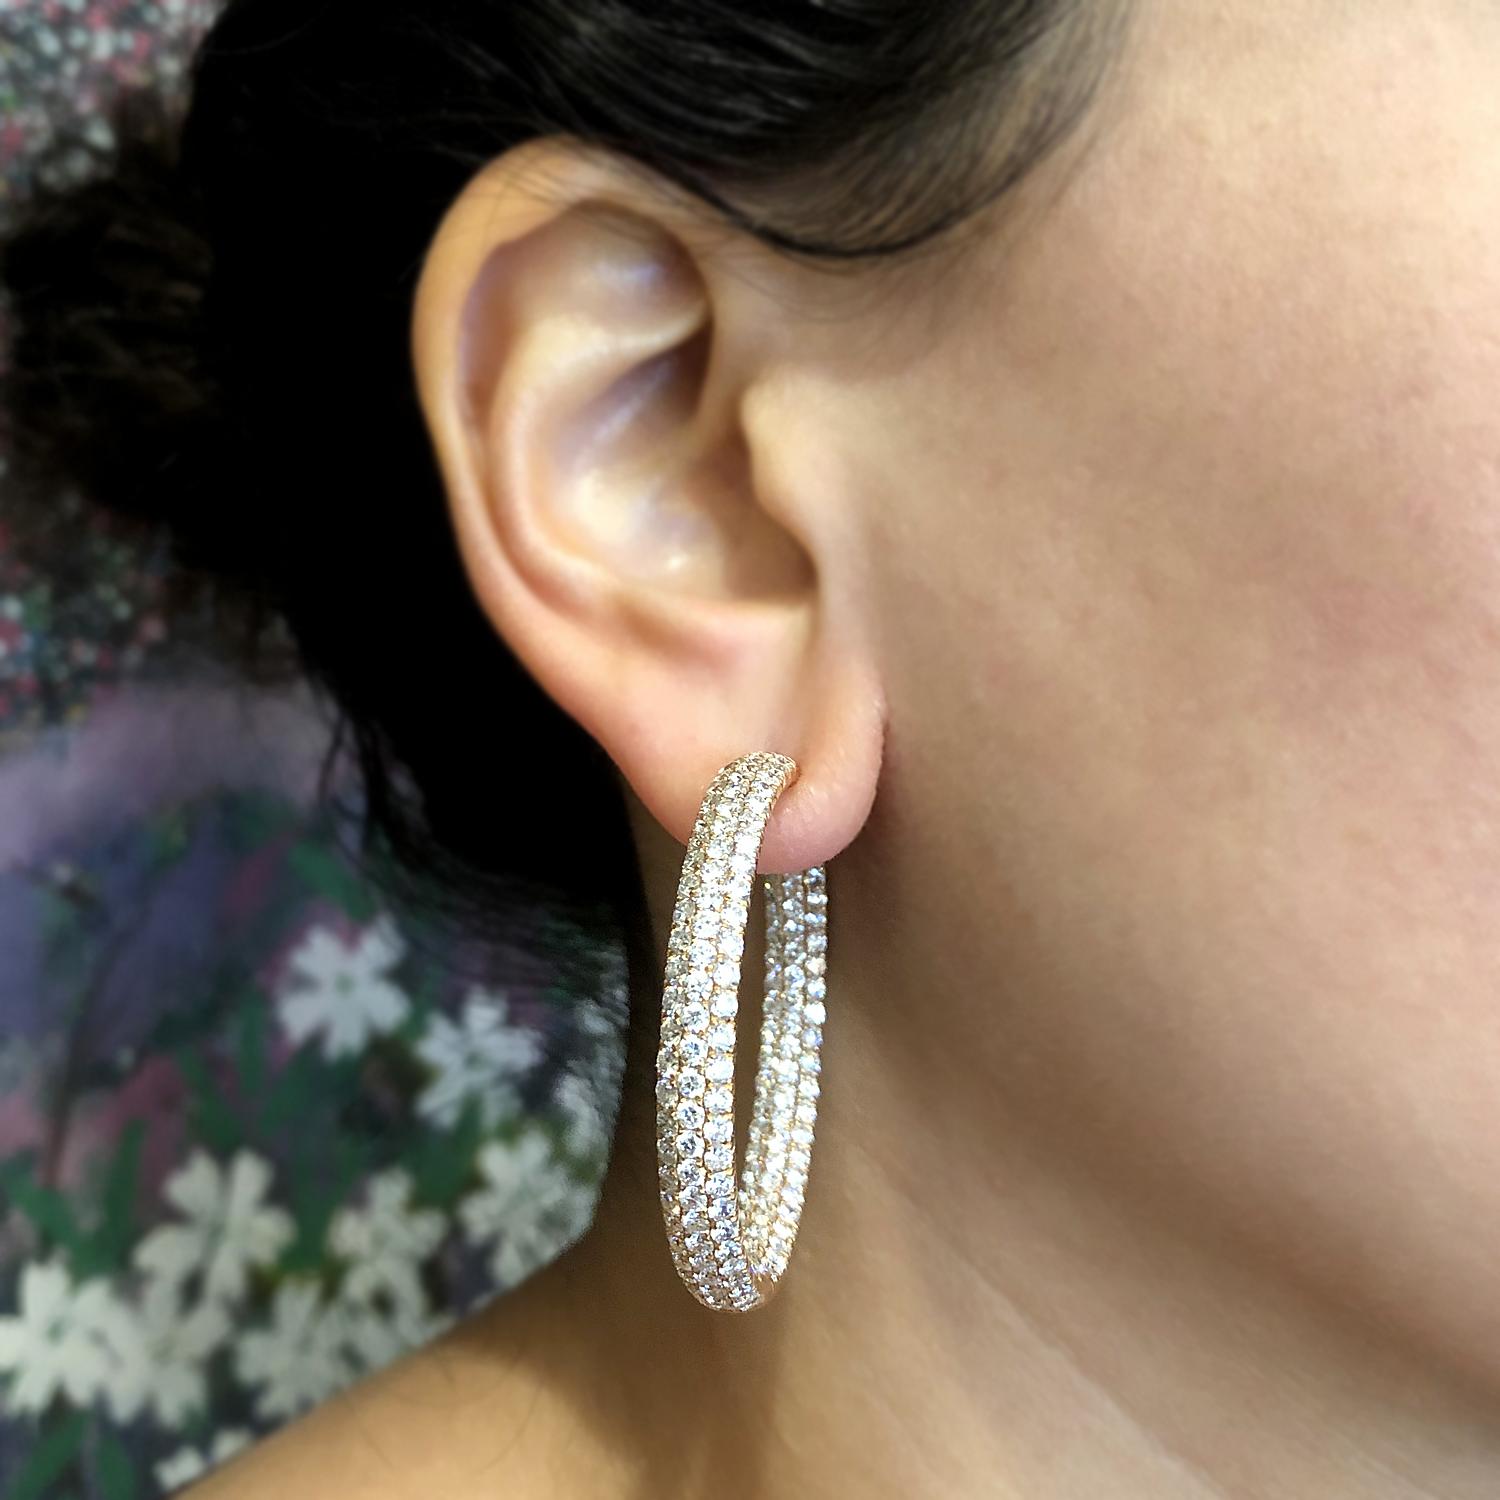 Magnificent Pave Diamond Gold Hoop Inside-Out Earrings For Sale 1